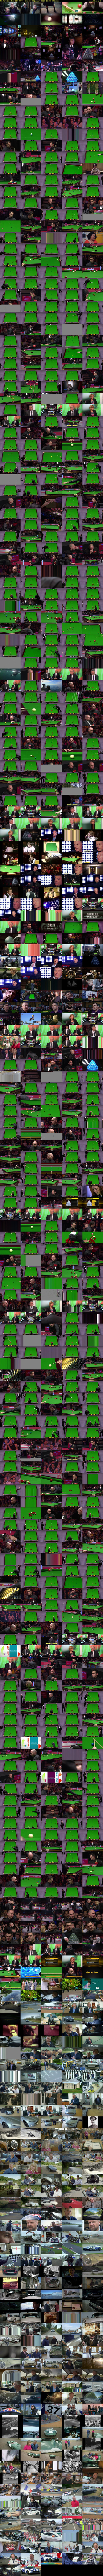 Masters Snooker (BBC TWO) Sunday 22 January 2017 19:00 - 23:00